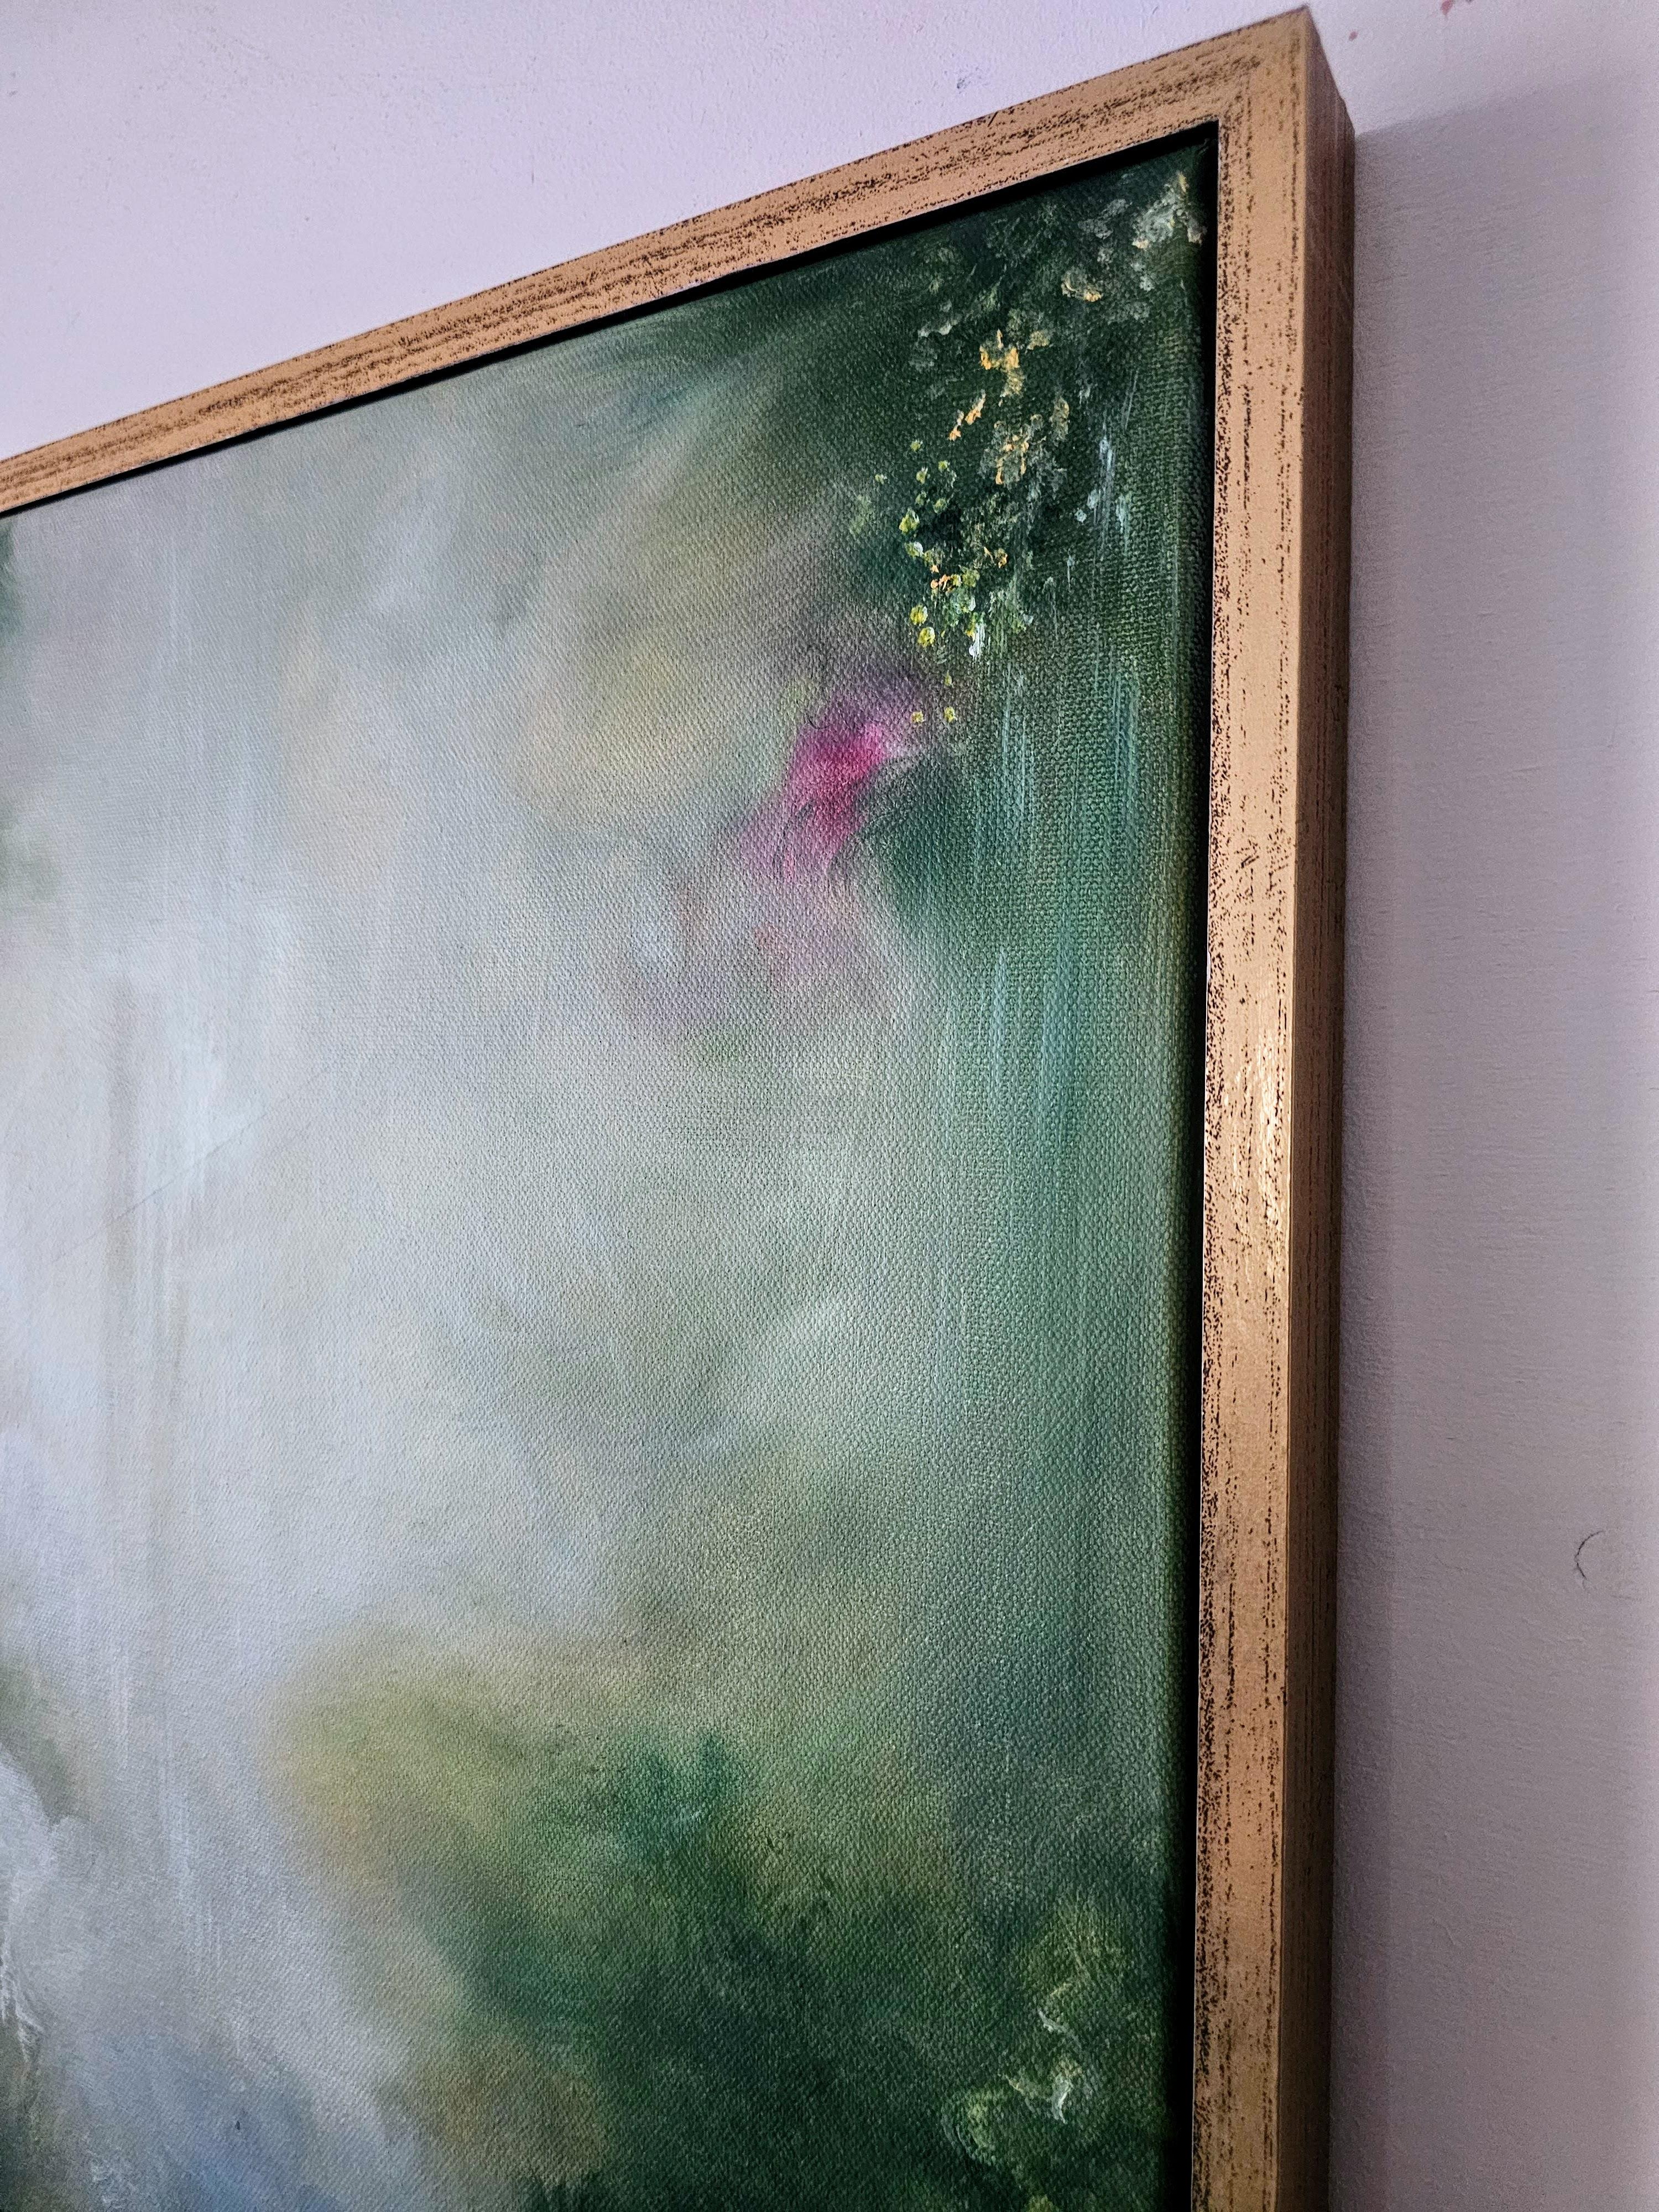 Enchanted - Framed abstract green nature painting - Abstract Impressionist Painting by Jennifer L. Baker